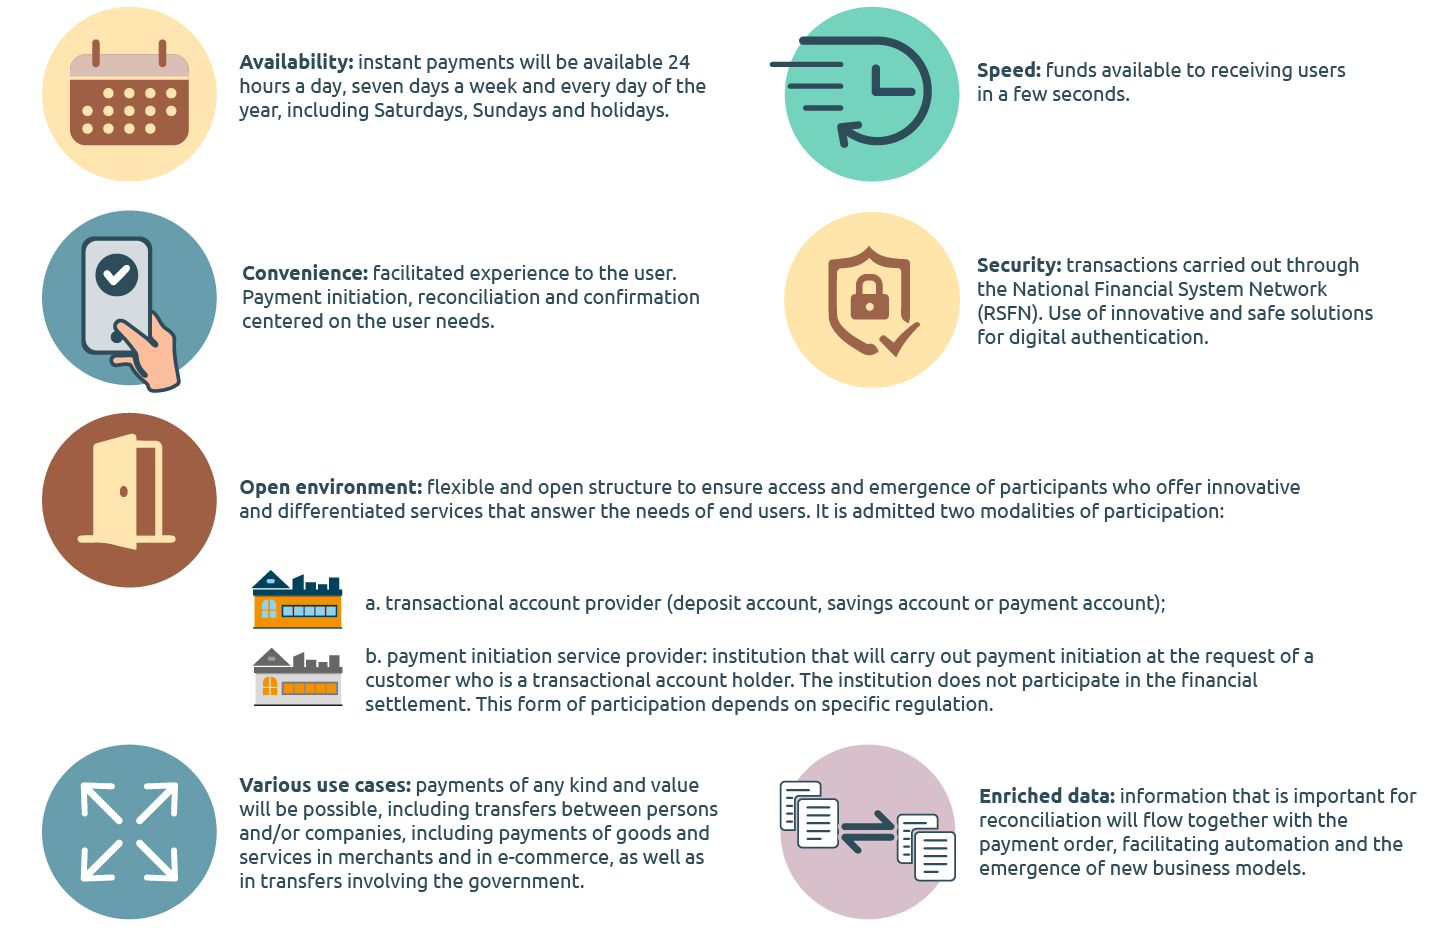 These are some of the benefits of an instant payments ecosystem [highlighted by the BCB](https://www.bcb.gov.br/en/financialstability/instantpayments)